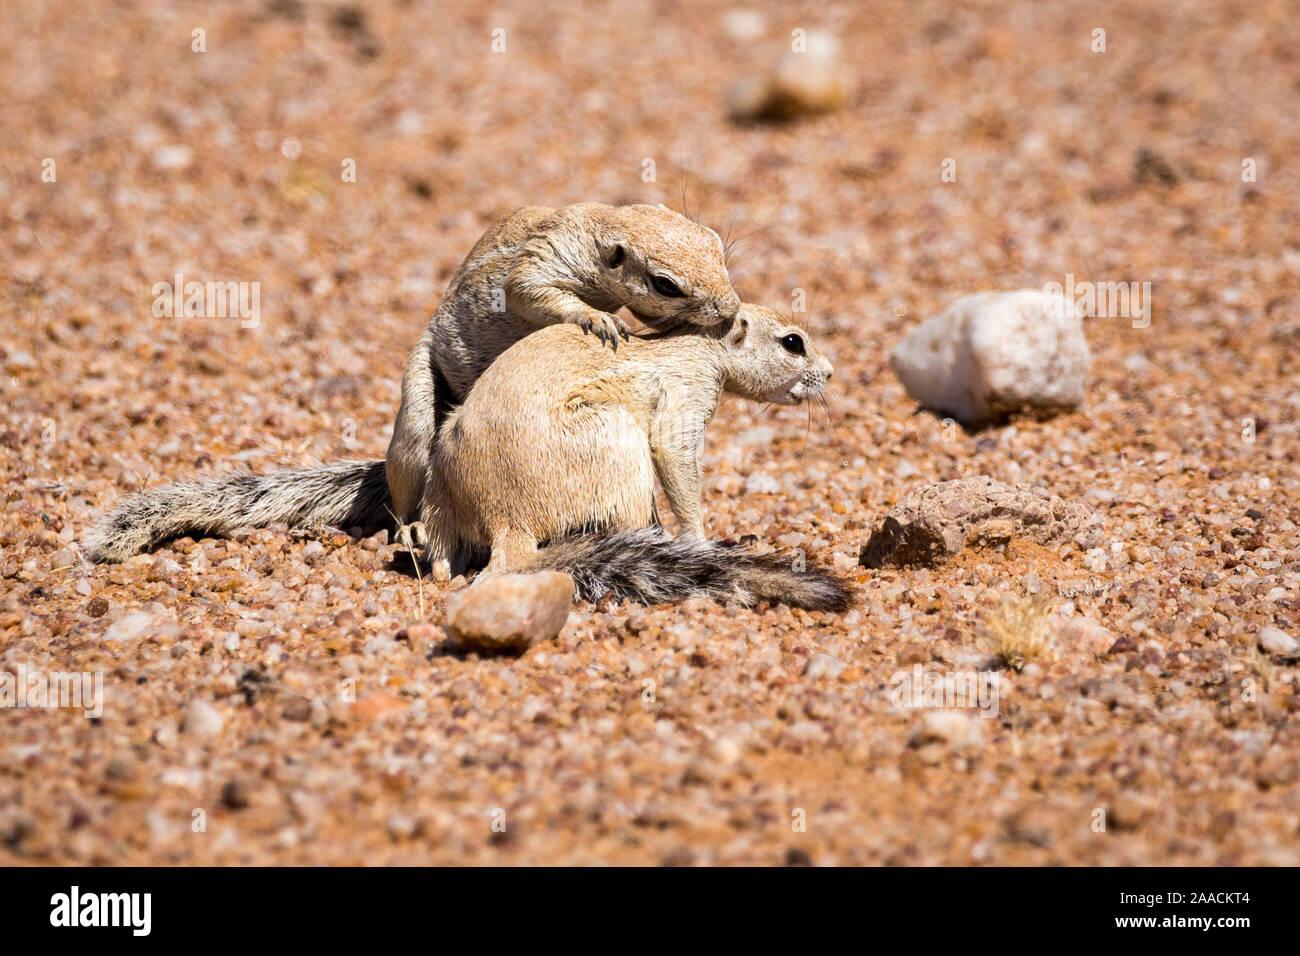 Two ground squirrels showing 'tenderness', Namibia, Africa Stock Photo